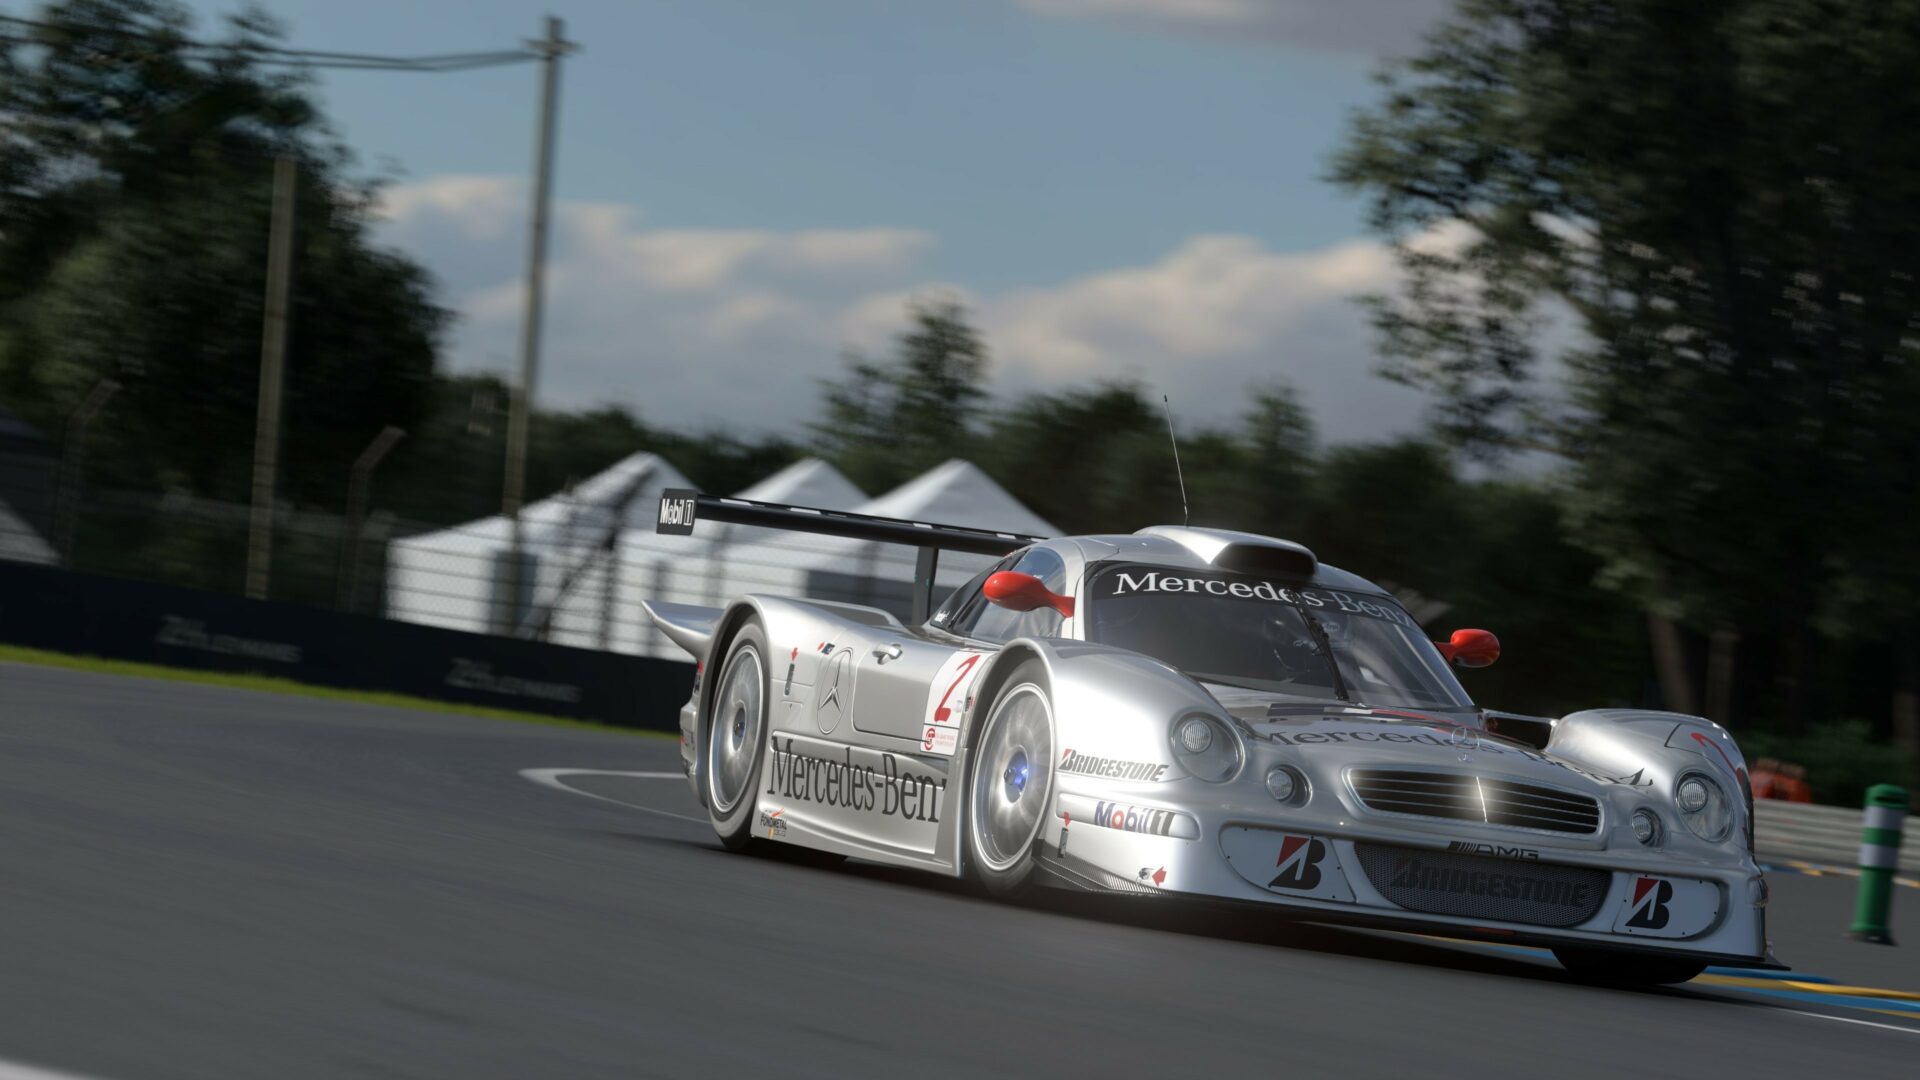 Gran Turismo 7 (GT7) Update 1.07 Patch Notes Today, March 17